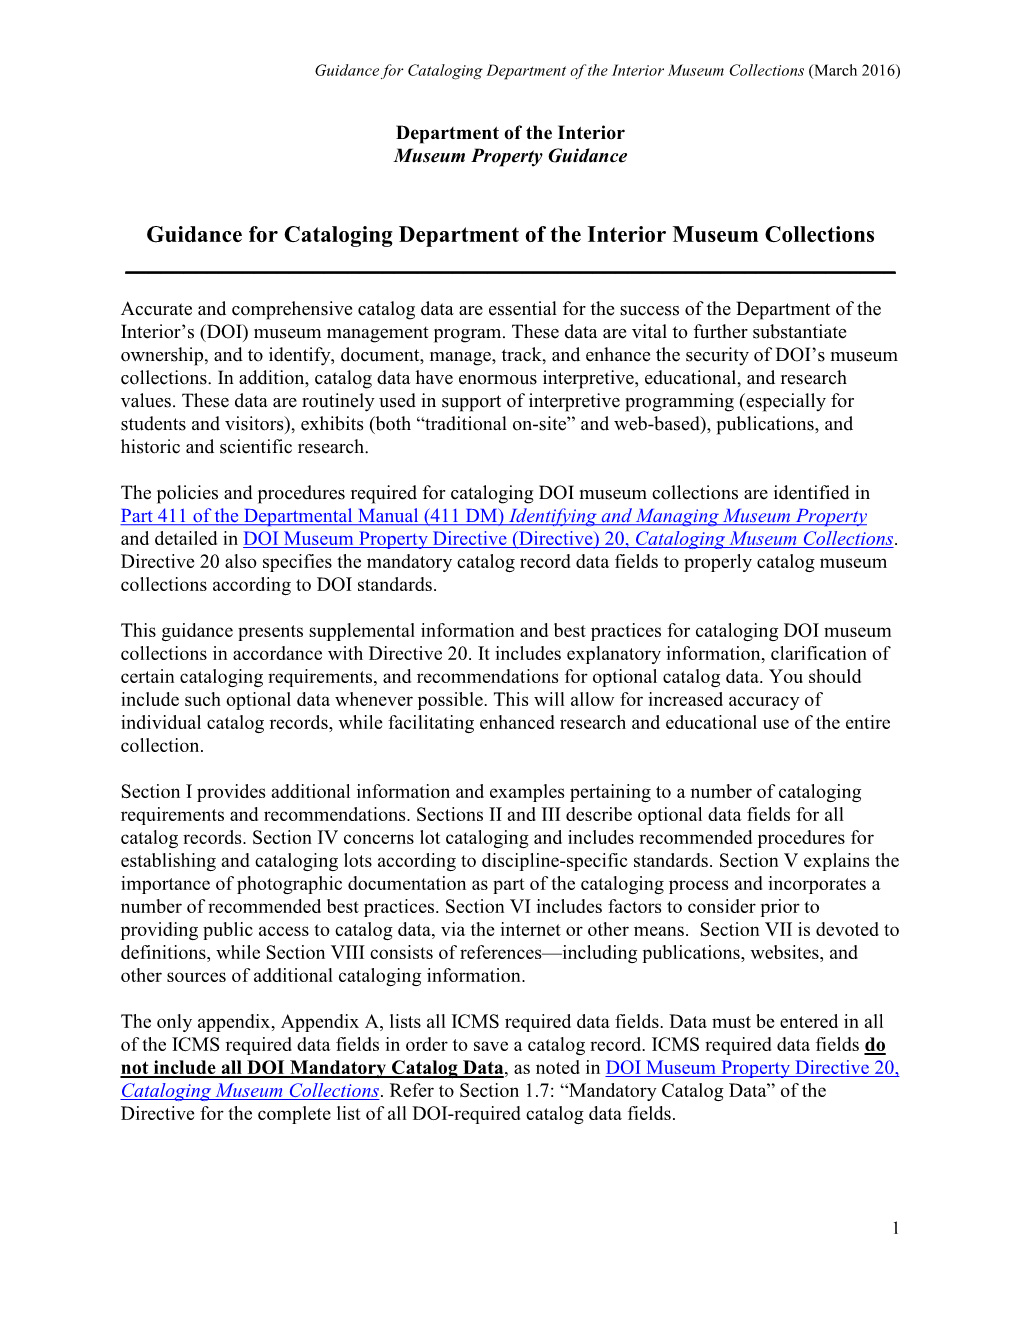 Guidance for Cataloging DOI Museum Collections